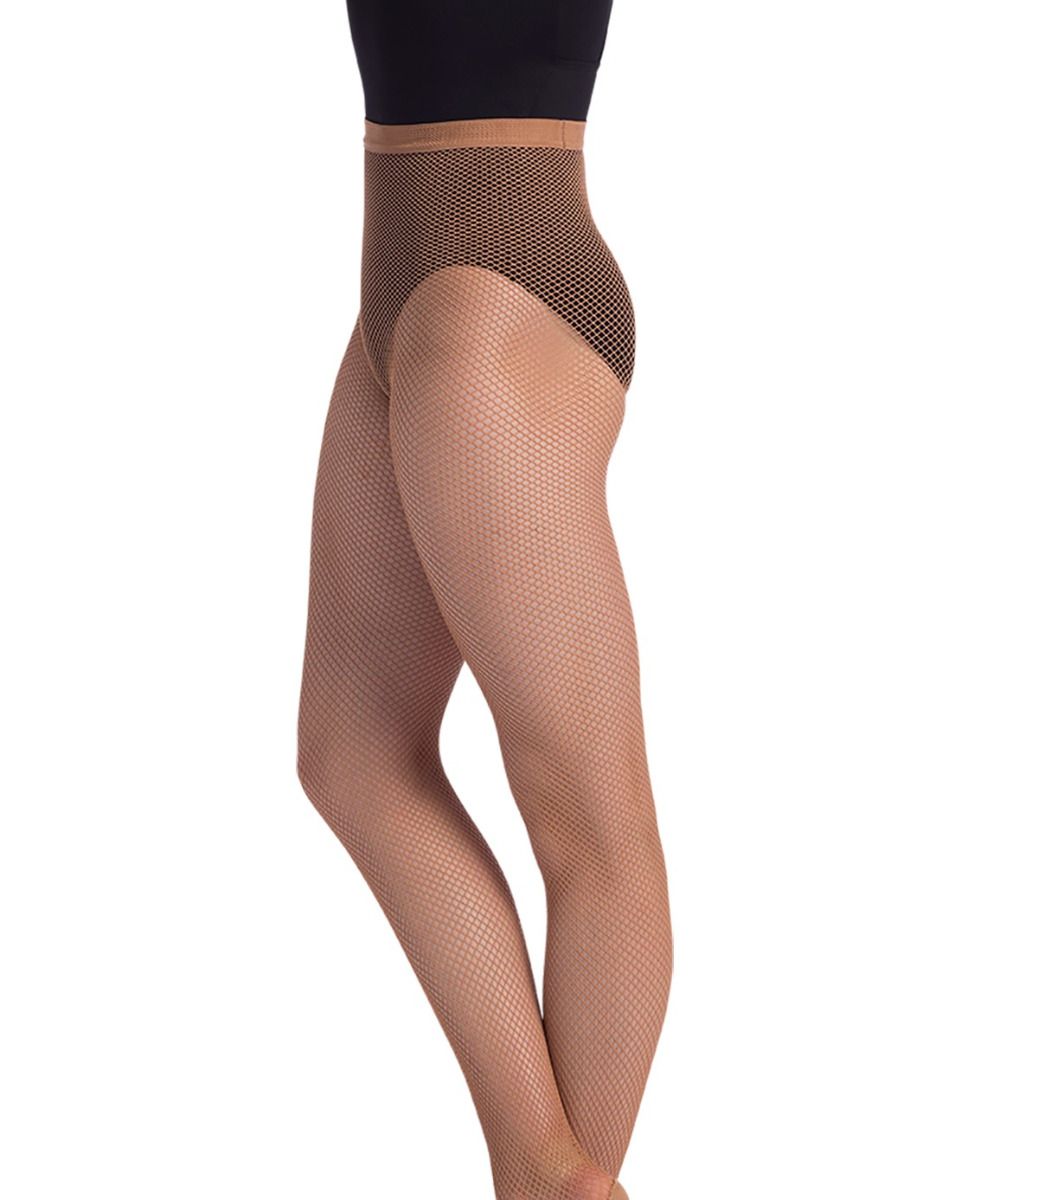 sofsy Micro-Net Fishnet High Waist Tights for Women - [Made In